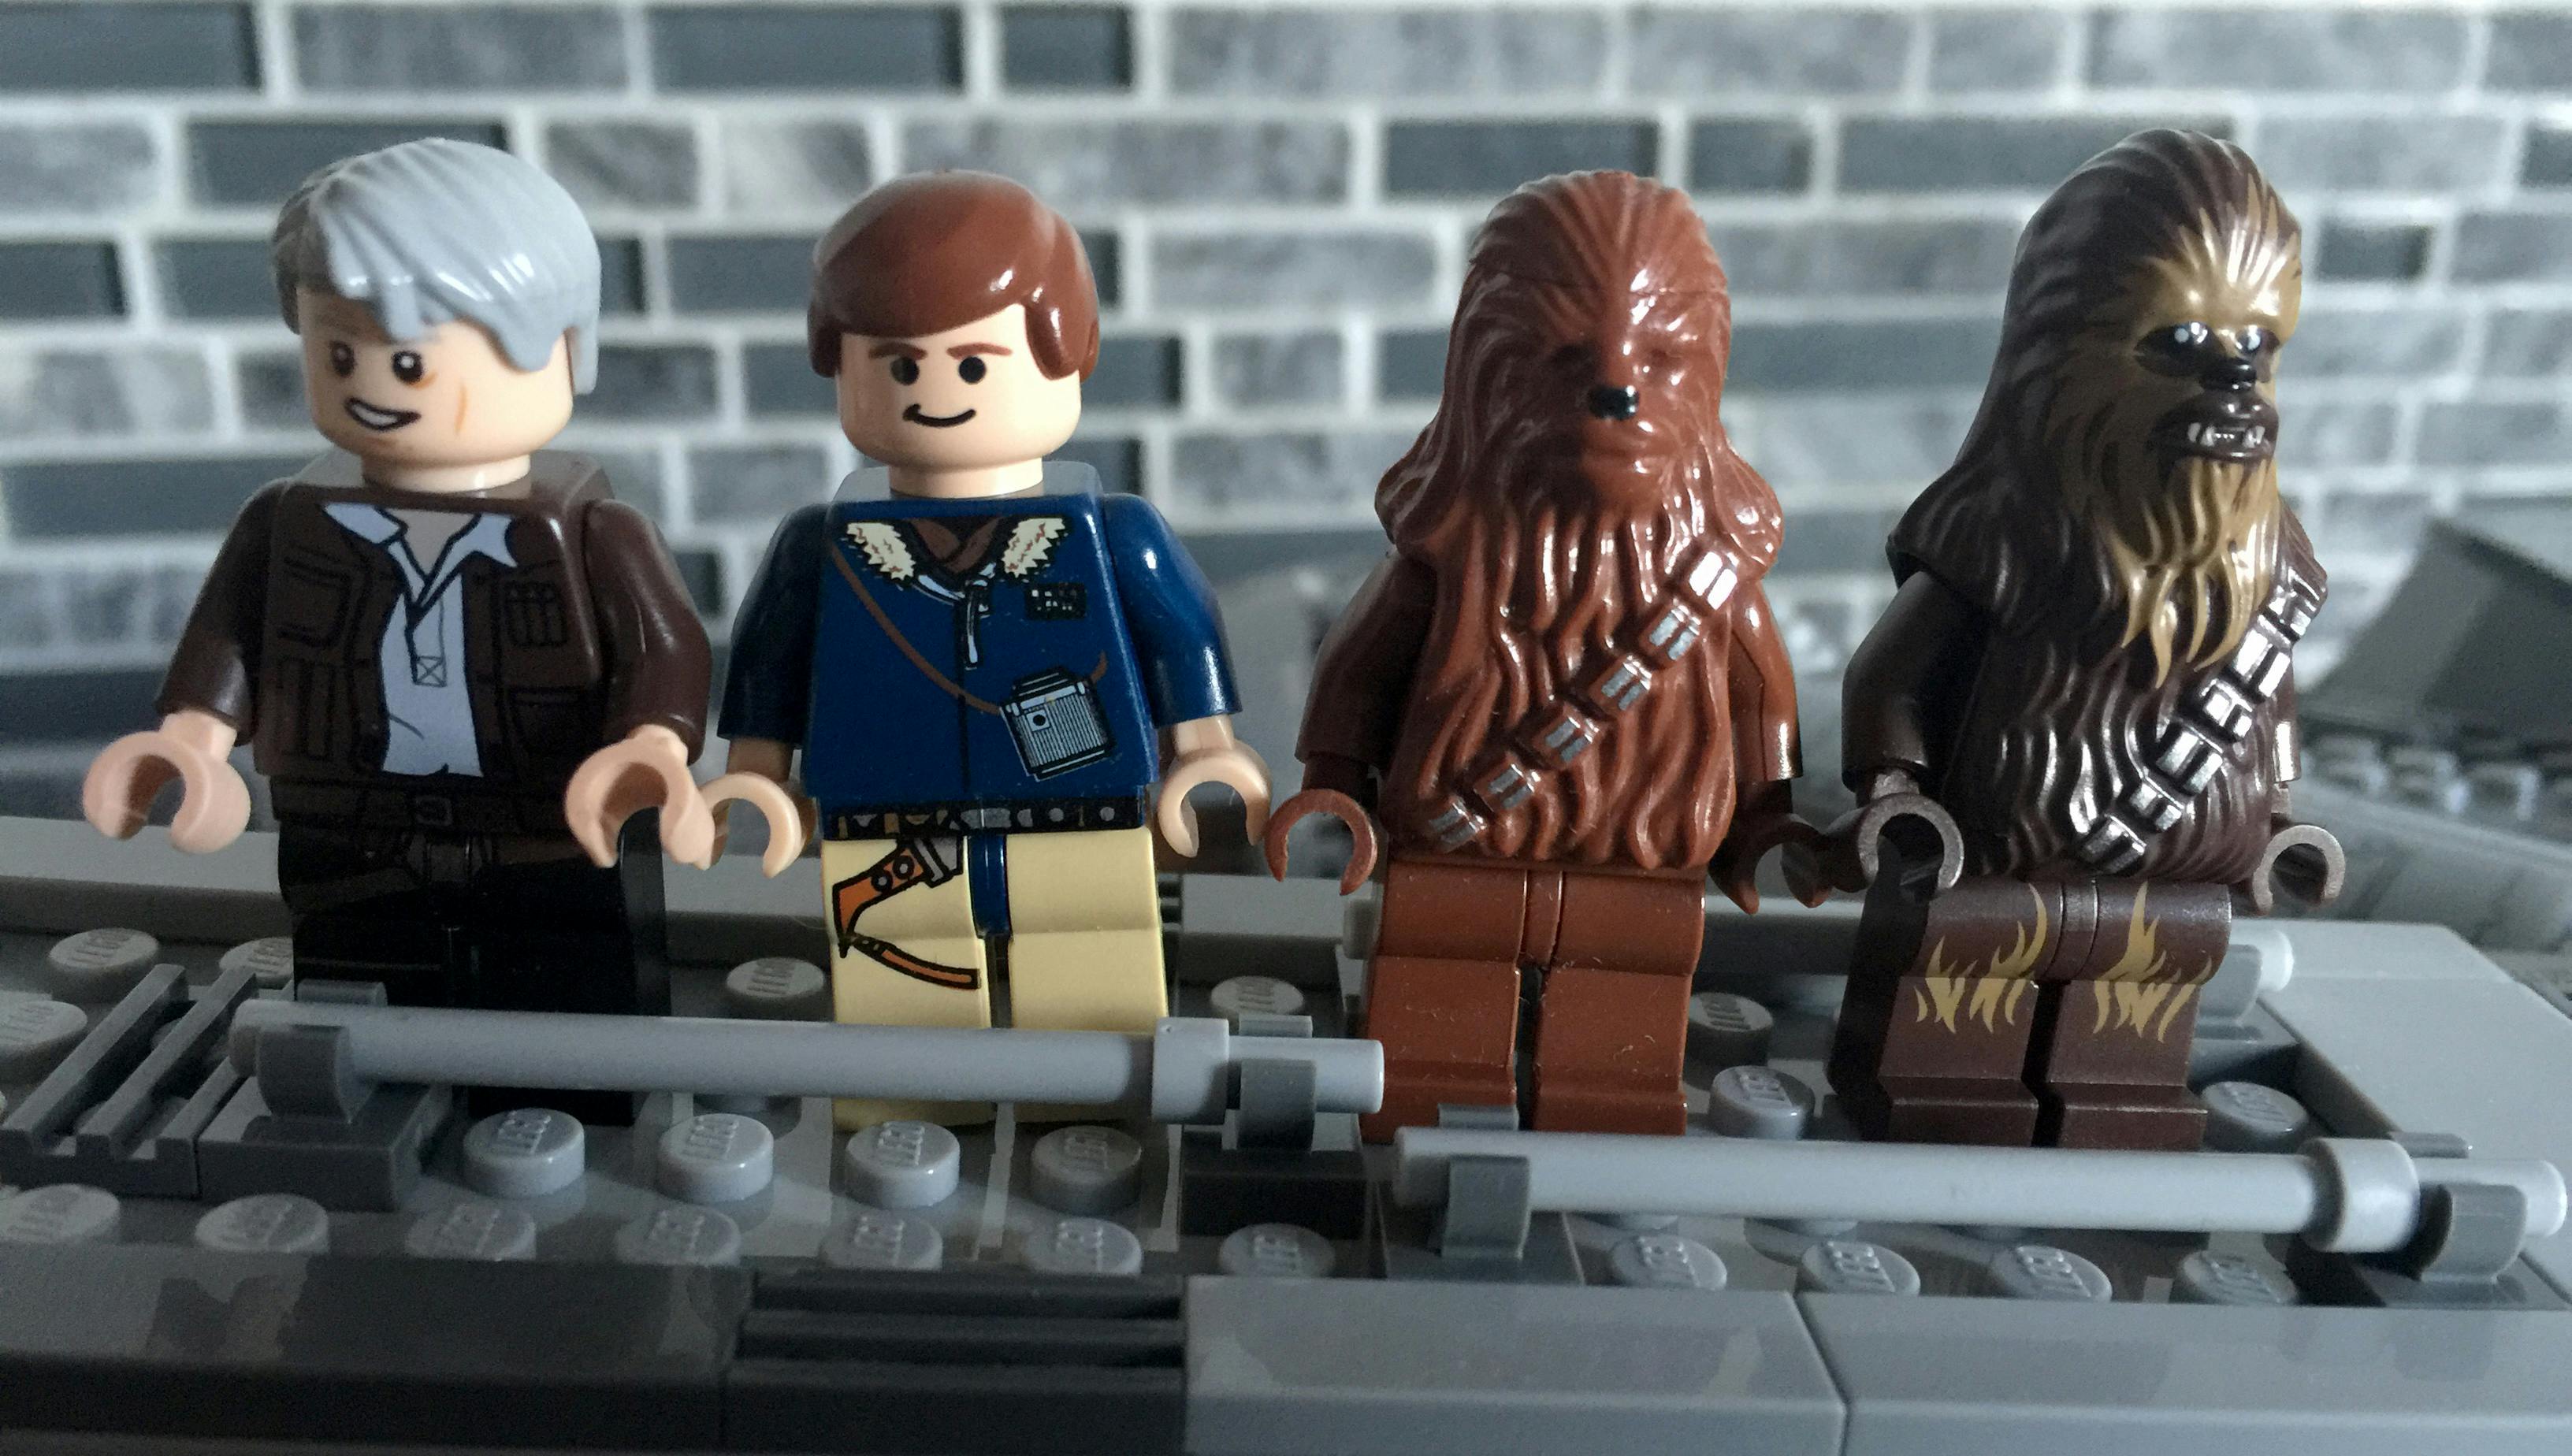 2004 versions of Lego Han Solo and Chewbacca with the new 2015 versions.